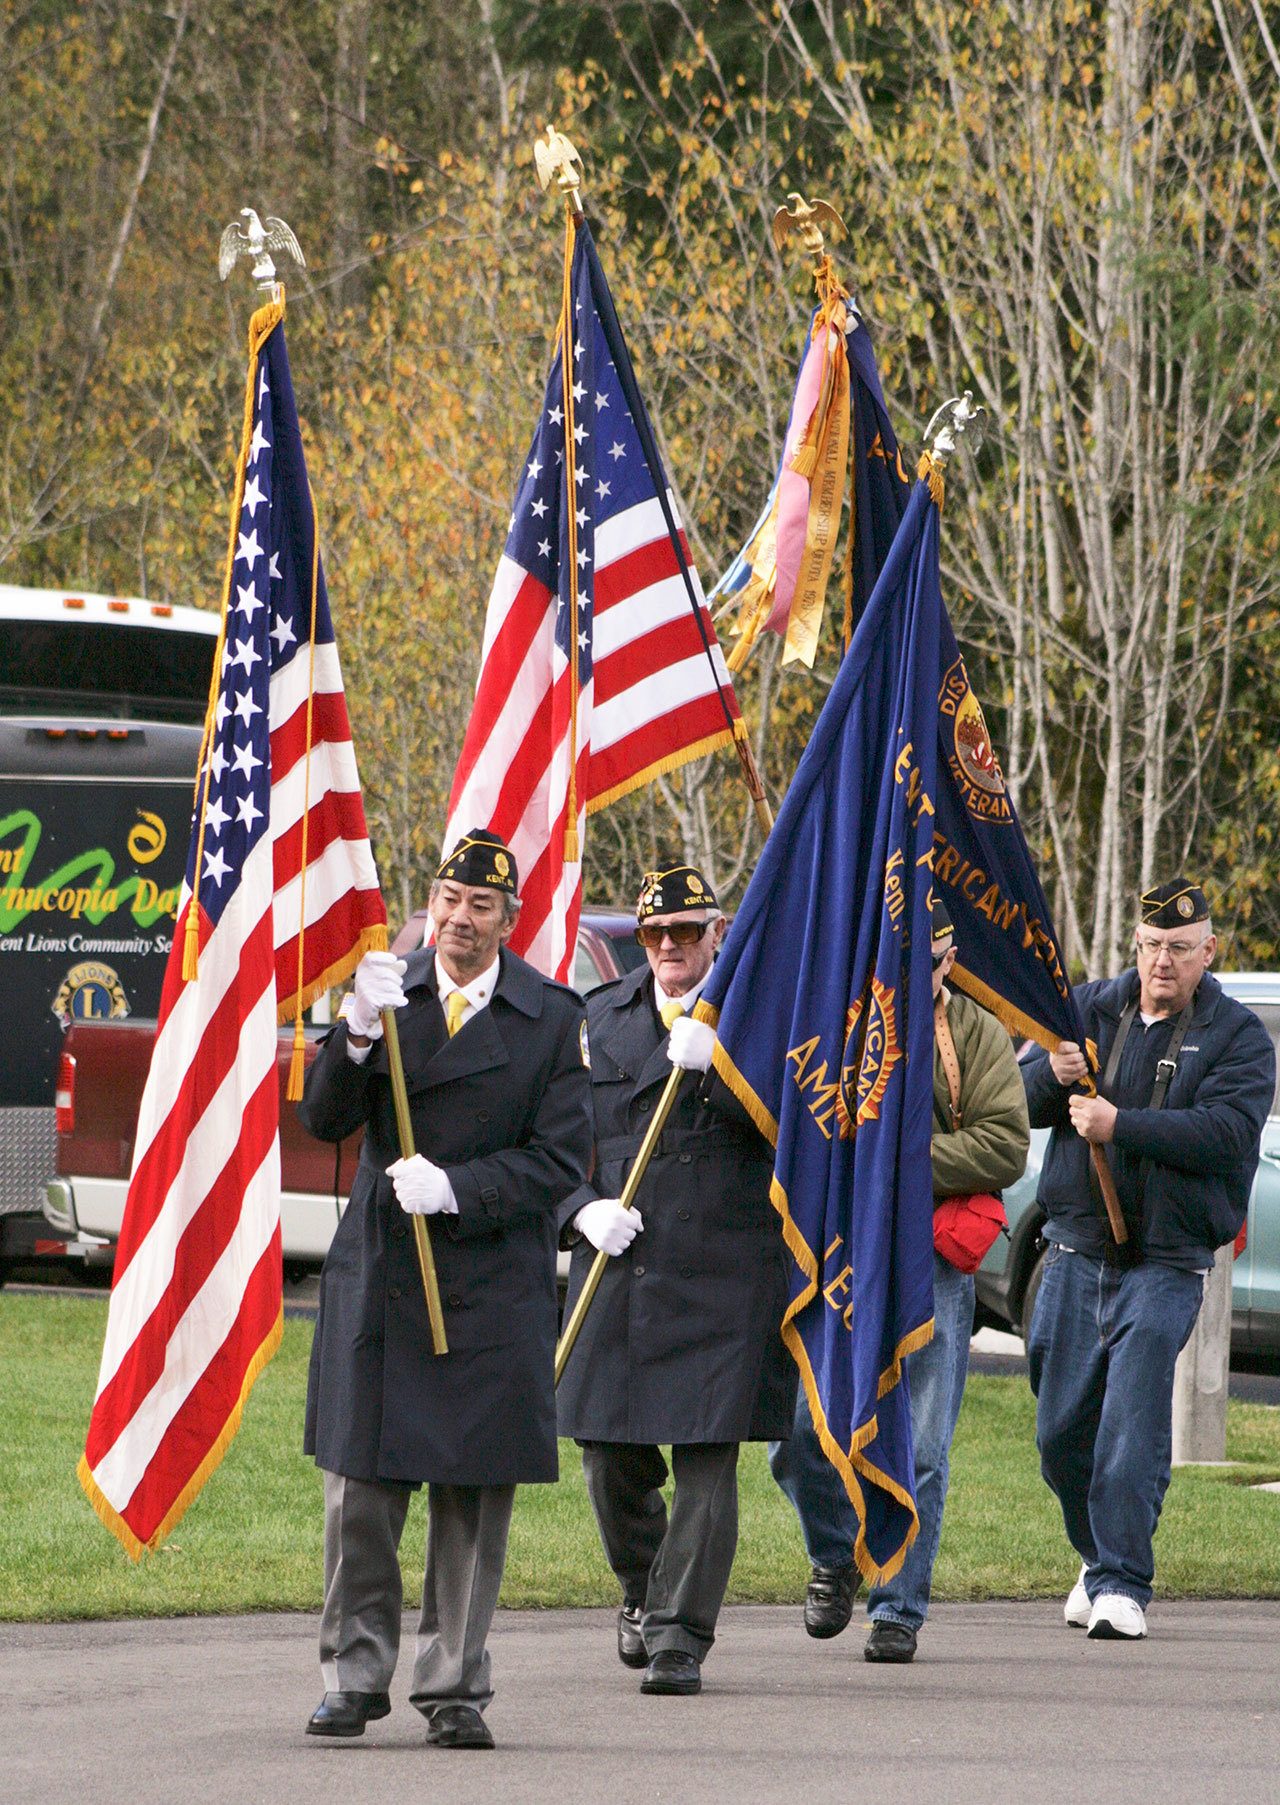 The Tahoma National Cemetery Veterans Day Ceremony is 11 a.m. Friday, Nov. 11, in the main flag pole assembly area, 8600 SE 240th St., Kent. The program celebrates and honors all military members who have served or are serving the nation. DENNIS BOX, Reporter